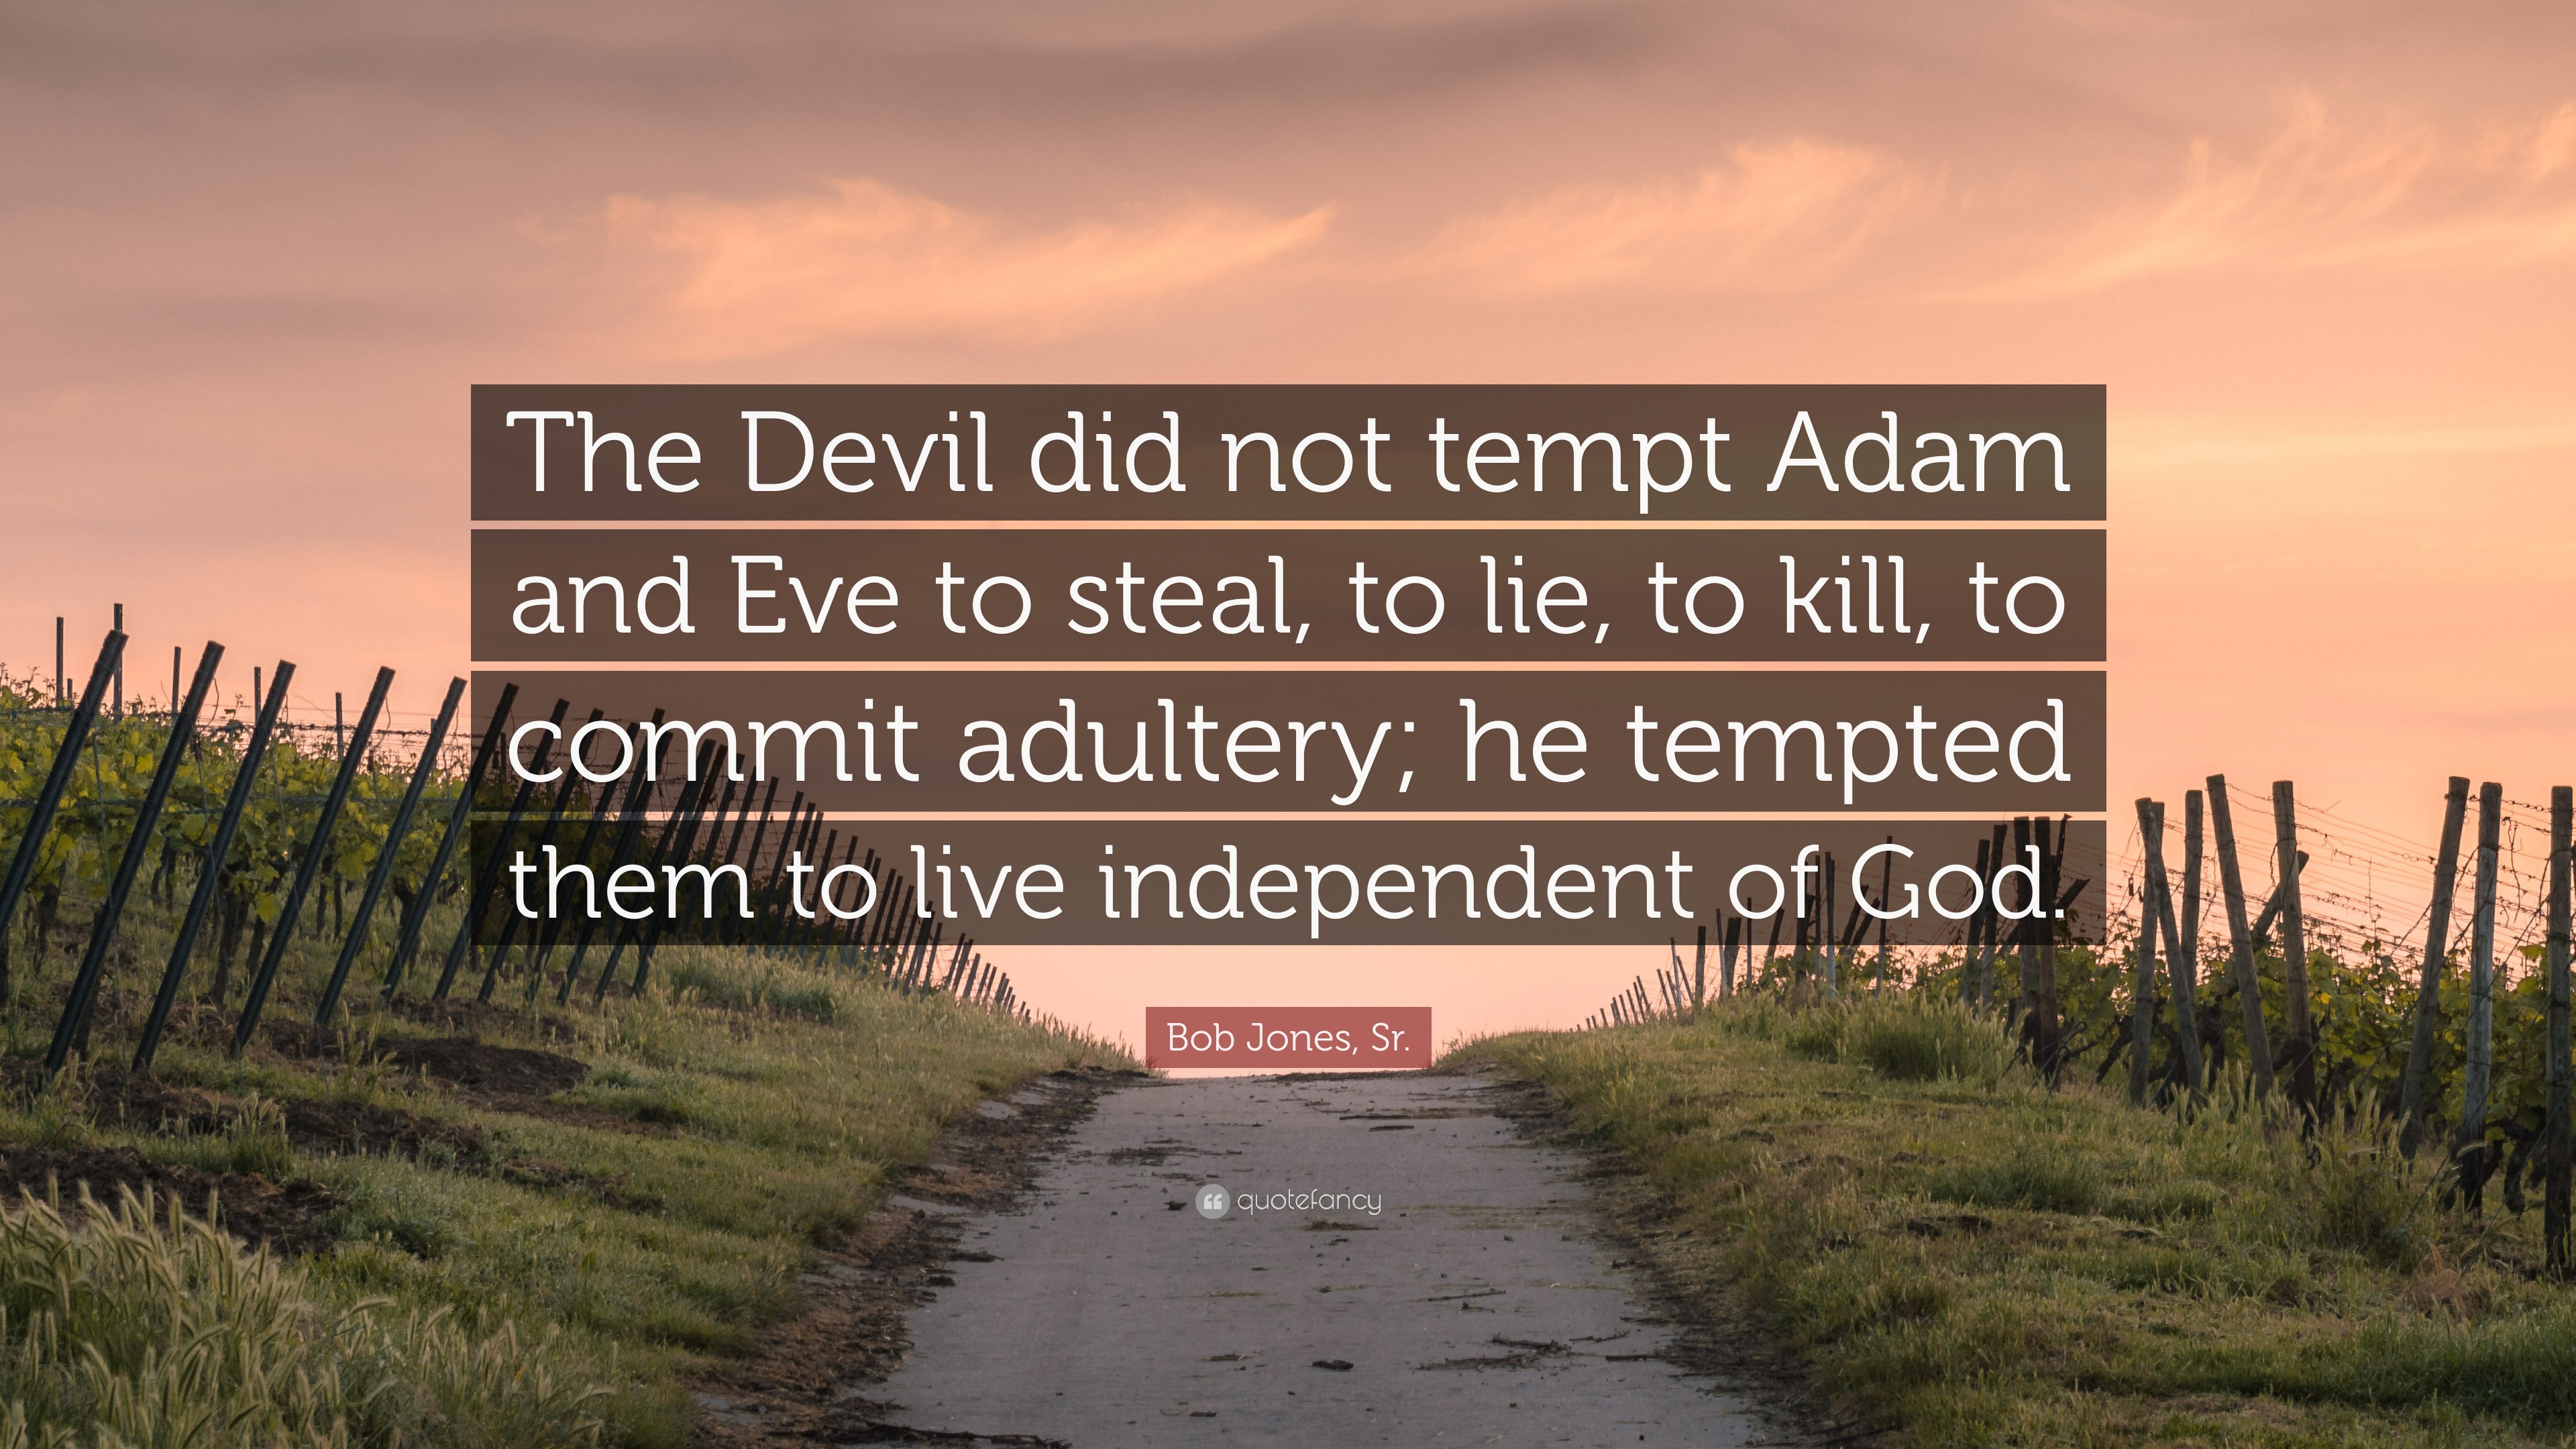 Bob Jones, Sr. Quote: "The Devil did not tempt Adam and Eve to steal, to lie, to kill, to commit ...